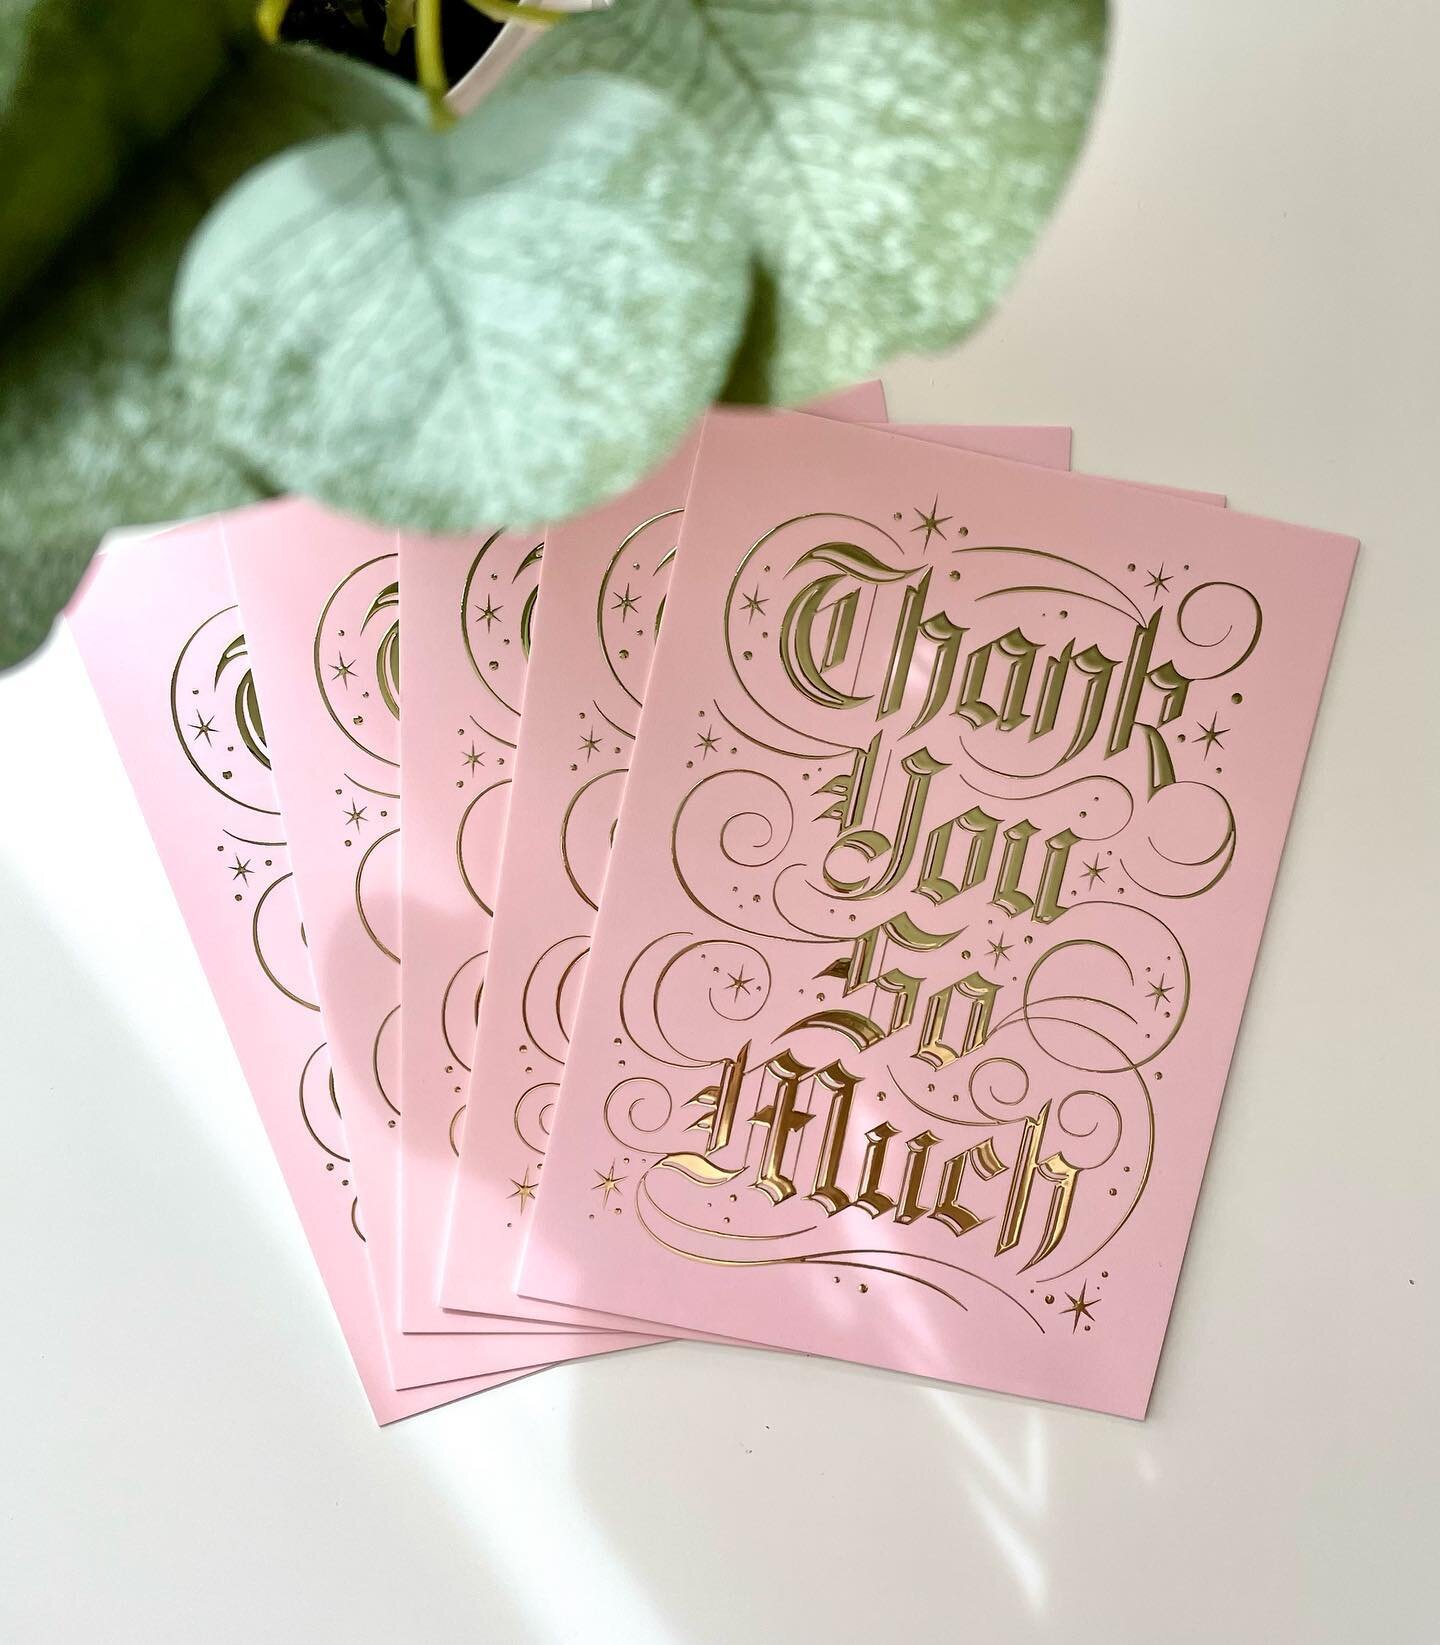 Still over here dreaming about how well these hand-lettered thank you cards came out (shout out to @moo). The goal here was to develop a blackletter style that evokes a vintage fairytale storybook. 👑 One-as a lettering challenge for myself-and two-i